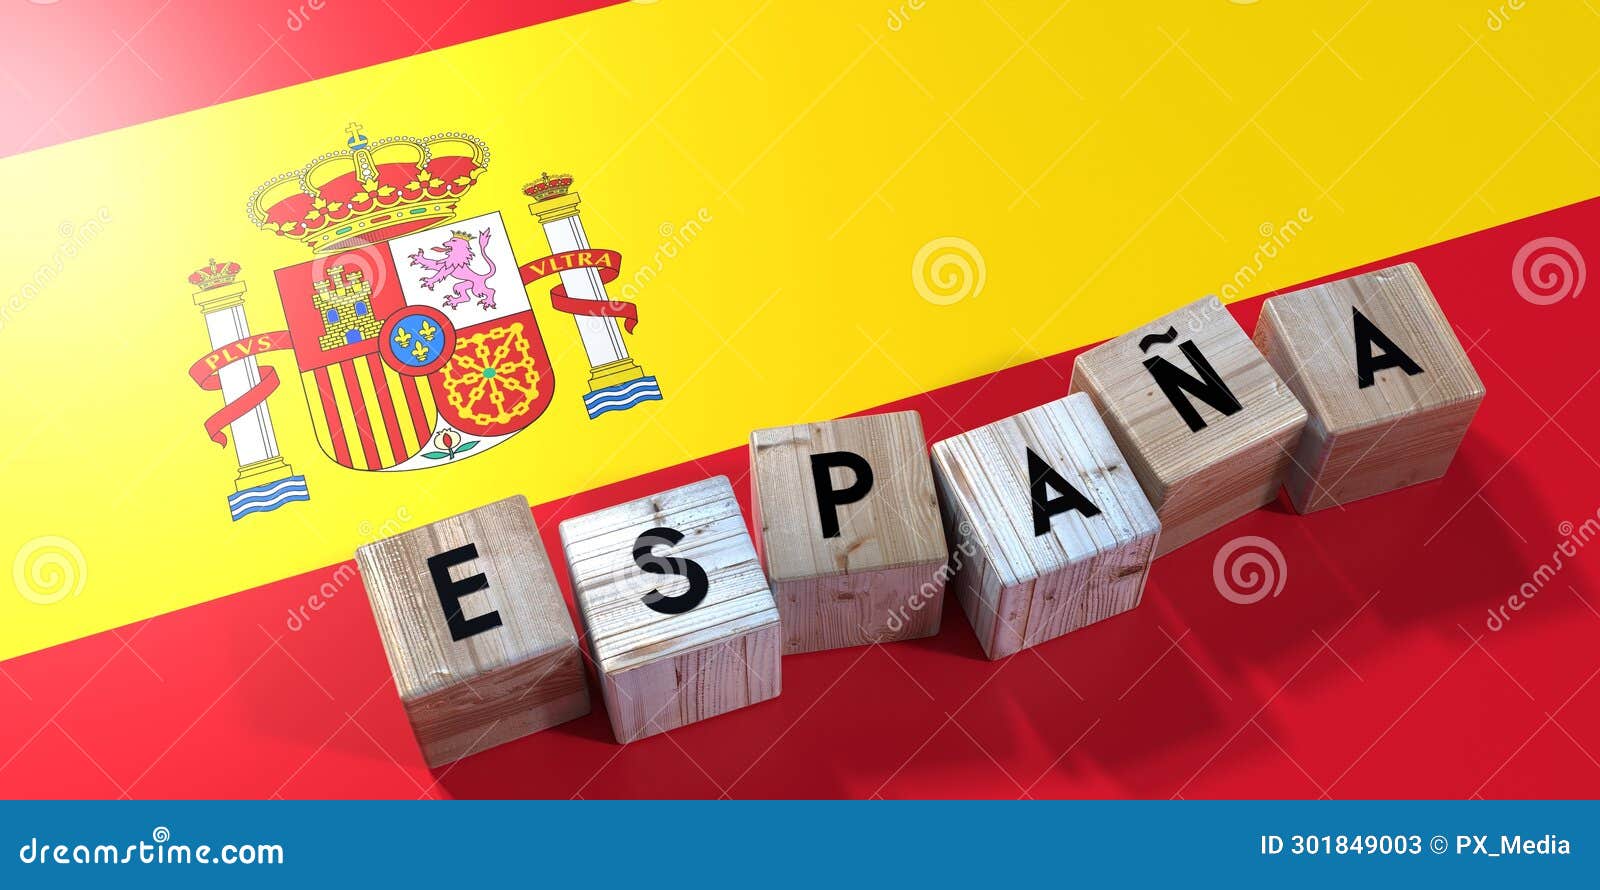 espania - spain - wooden cubes and country flag